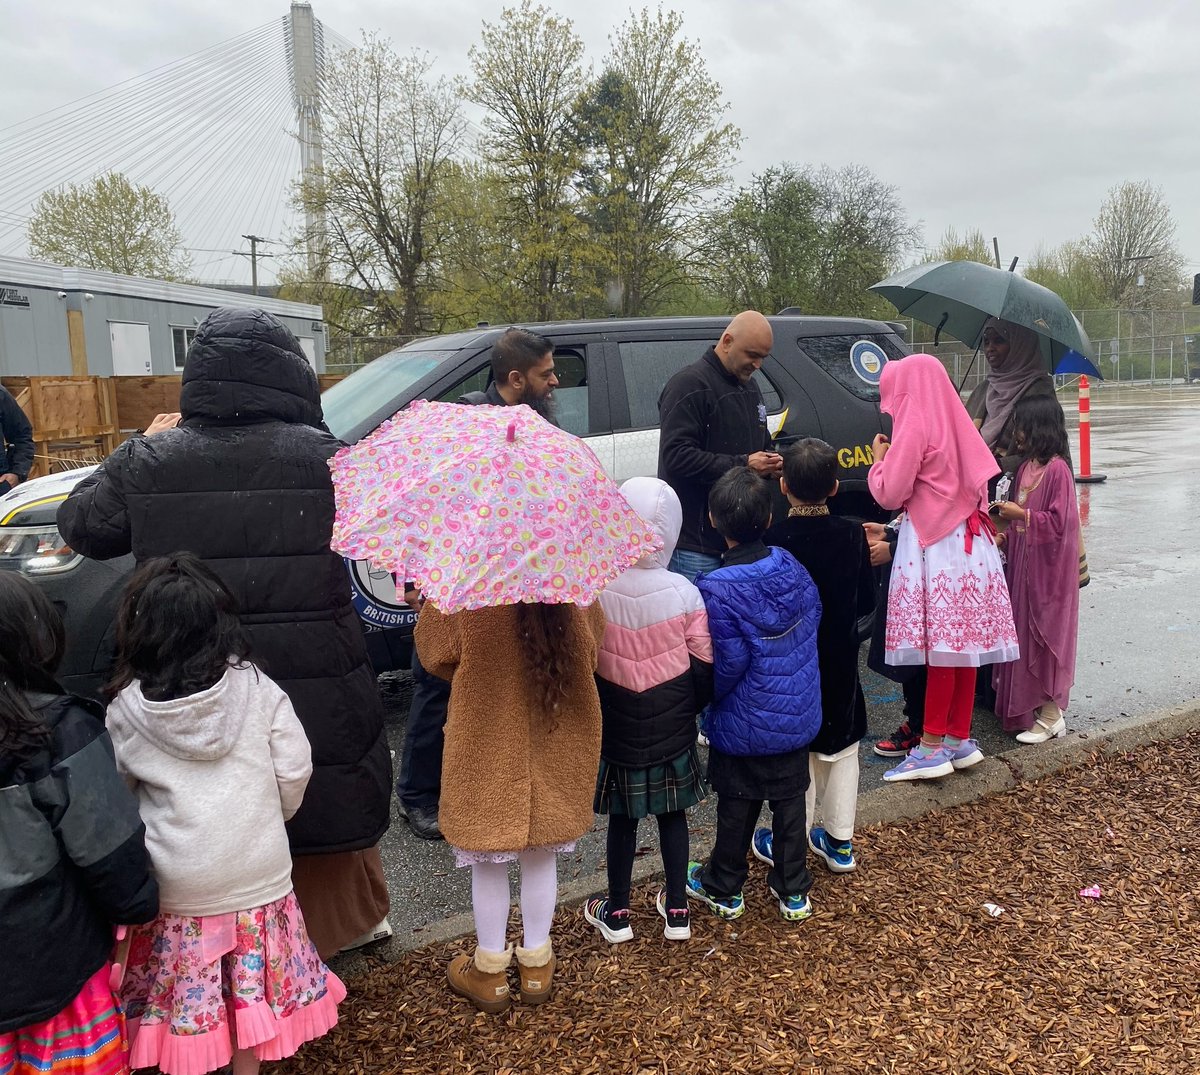 Members from @CFSEU_GIET attended the #EidMubarak school parade at Iqra Elementary to celebrate the end of #Ramadan. A big thank you to @TransitPolice for inviting us to participate. #EndGangLife #CFSEUBC